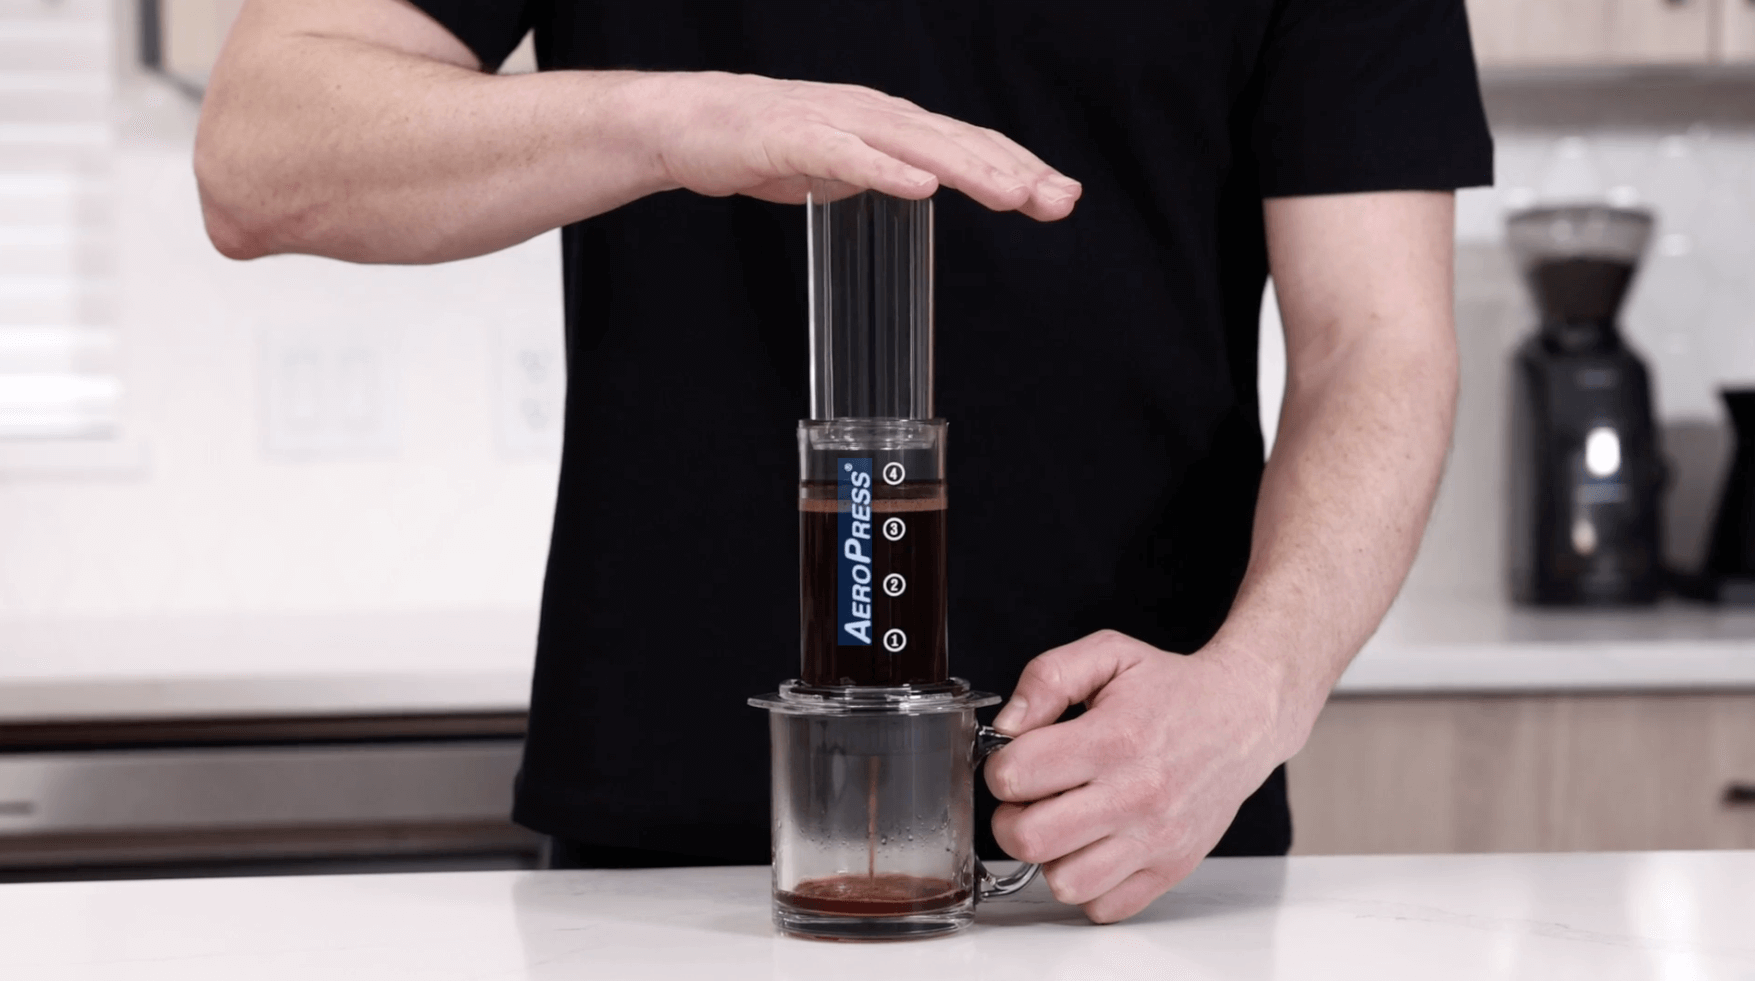 Man making espresso with an AeroPress coffee maker and Flow Control Filter Cap